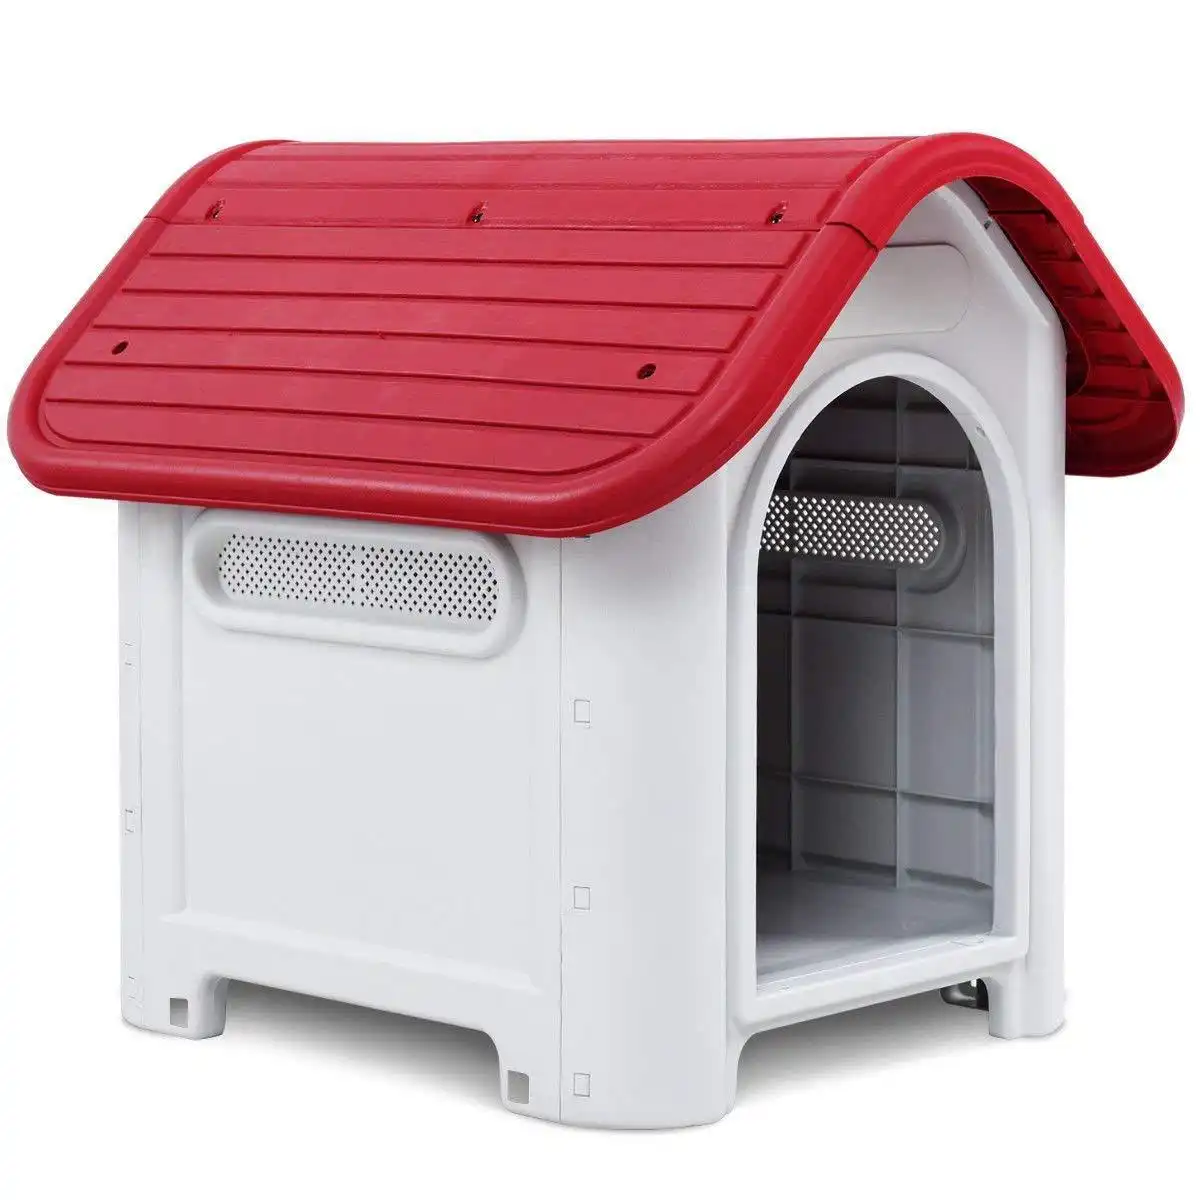 Waterproof Plastic Dog House Puppy Kennel Indoor Outdoor Pet Shelter - Up to 20lb